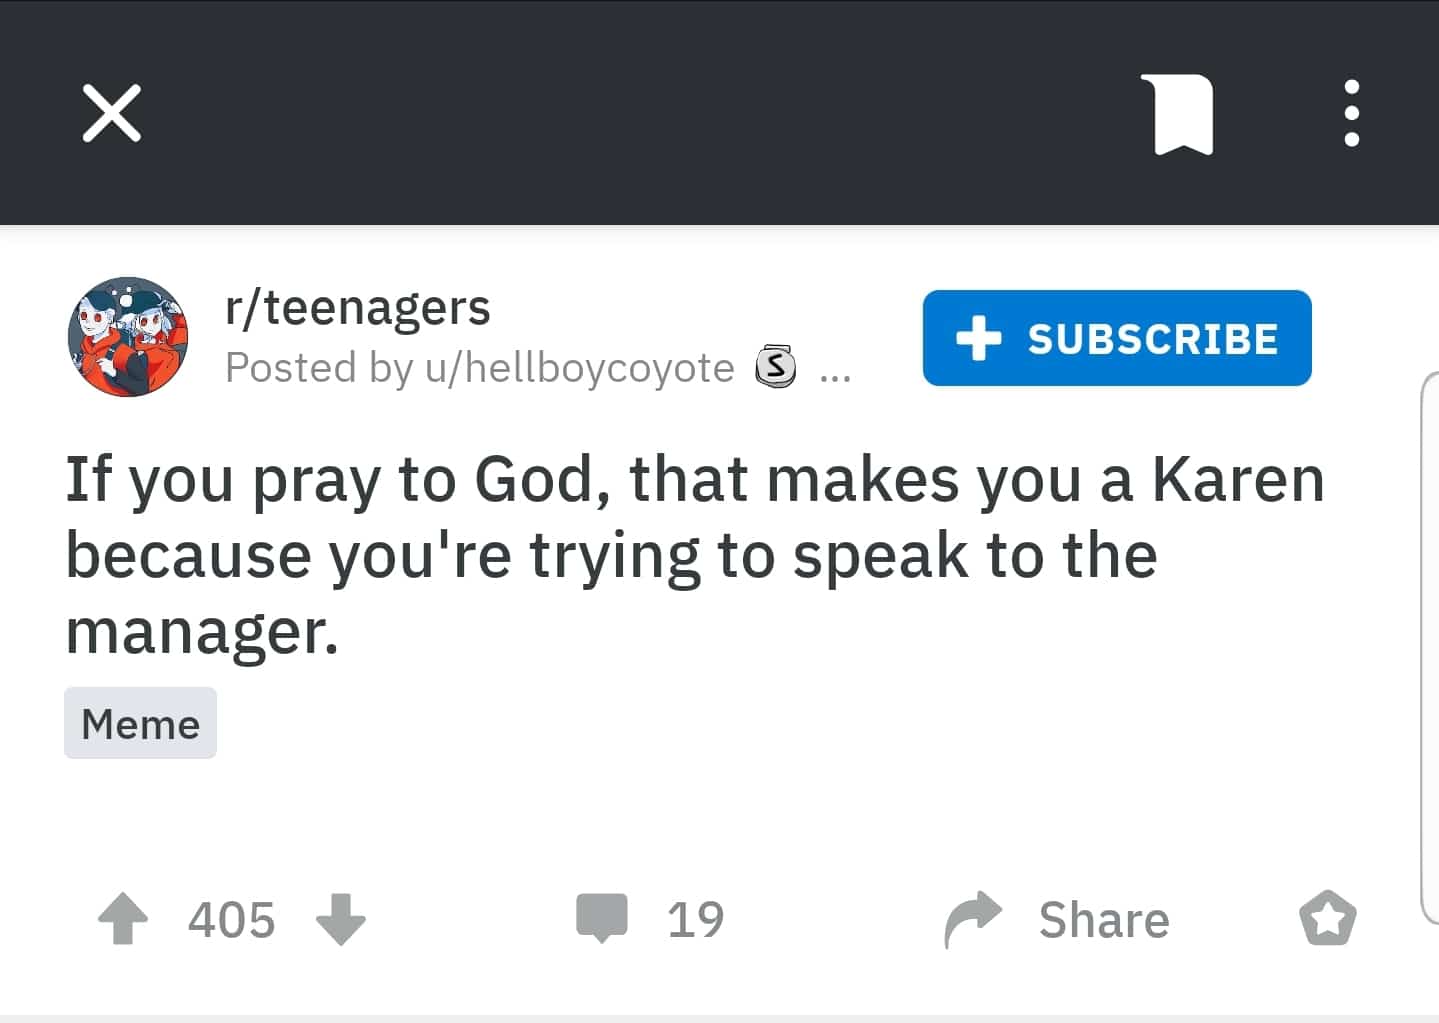 christian christian-memes christian text: 8 r/teenagers Posted by u/hellboycoyote (S + SUBSCRIBE If you pray to God, that makes you a Karen because youlre trying to speak to the manager. Meme 405 e 19 Share o 